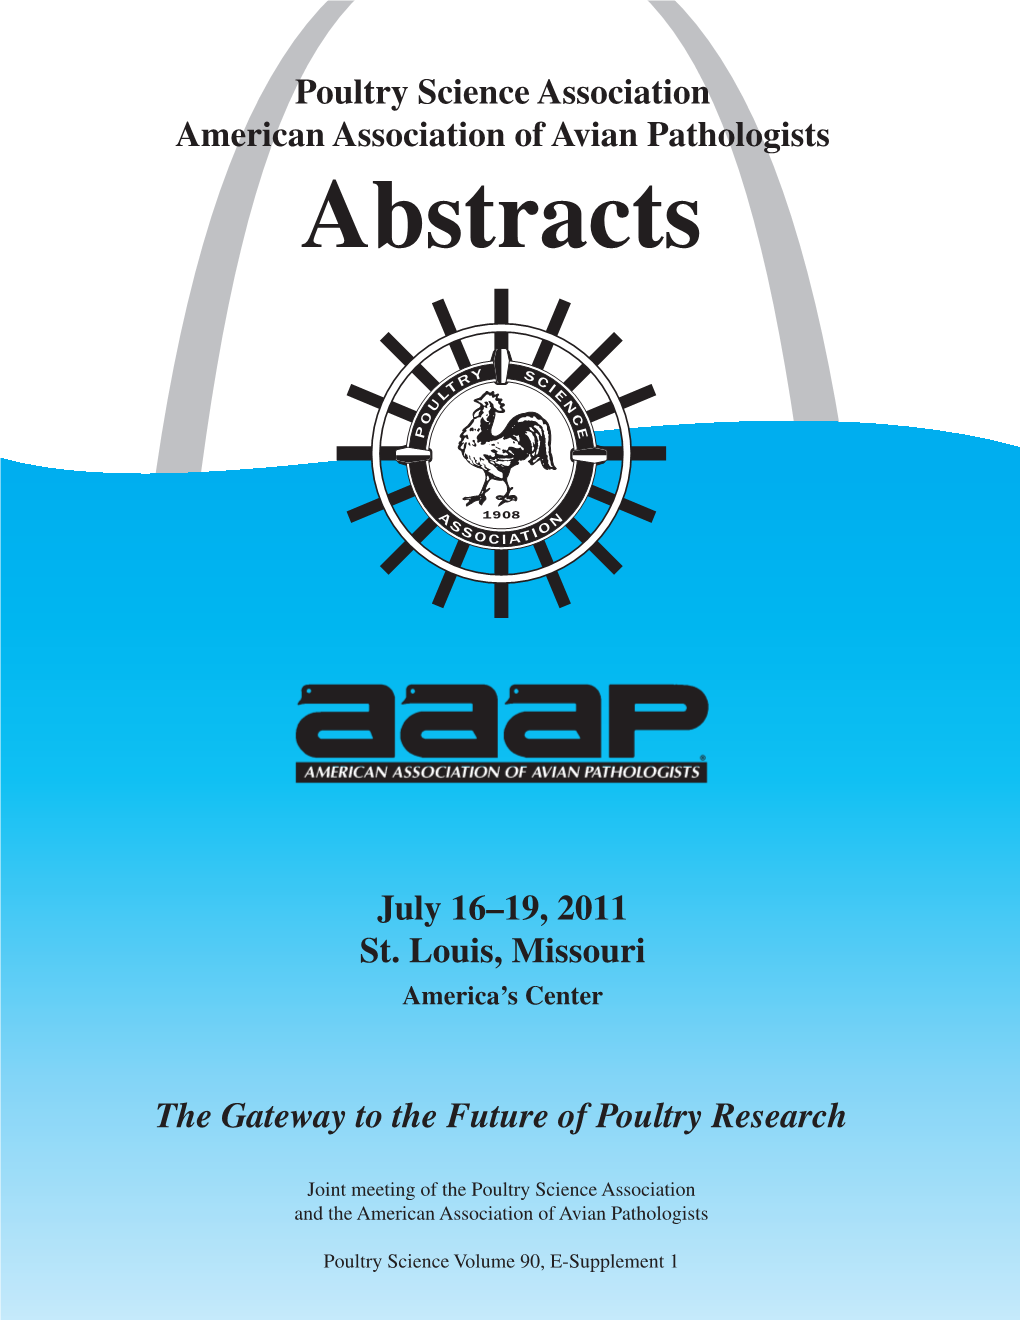 AAAP 2011 Abstracts